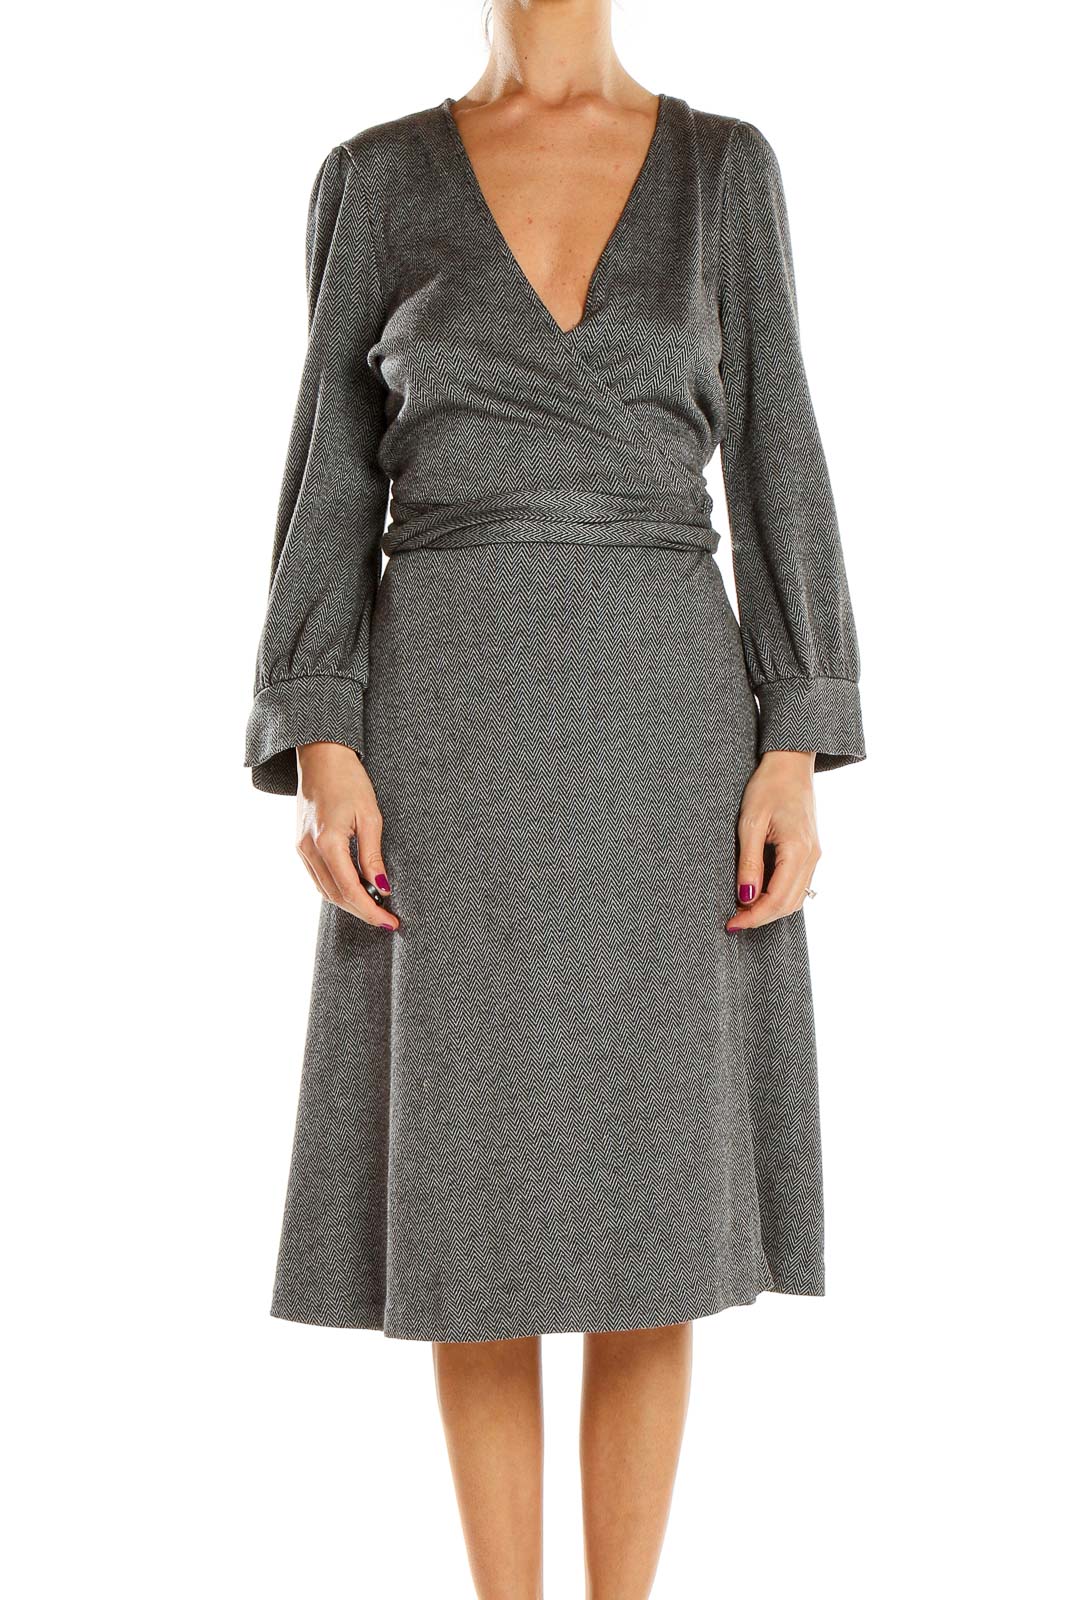 Gray Classic Fit & Flare Dress Front